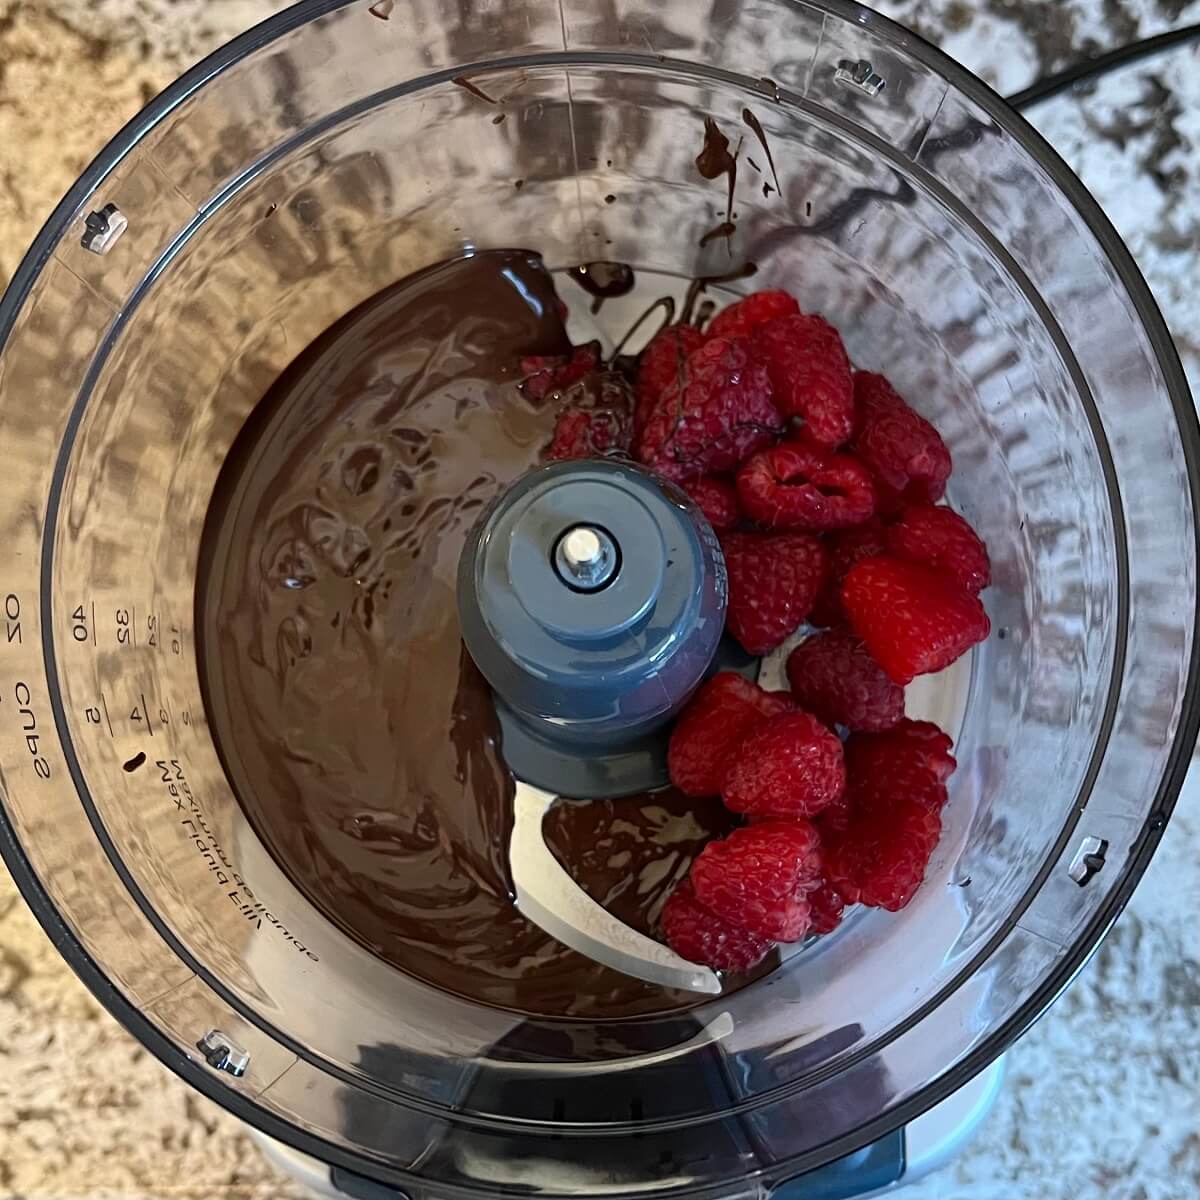 Raspberries and melted chocolate in a food processor.